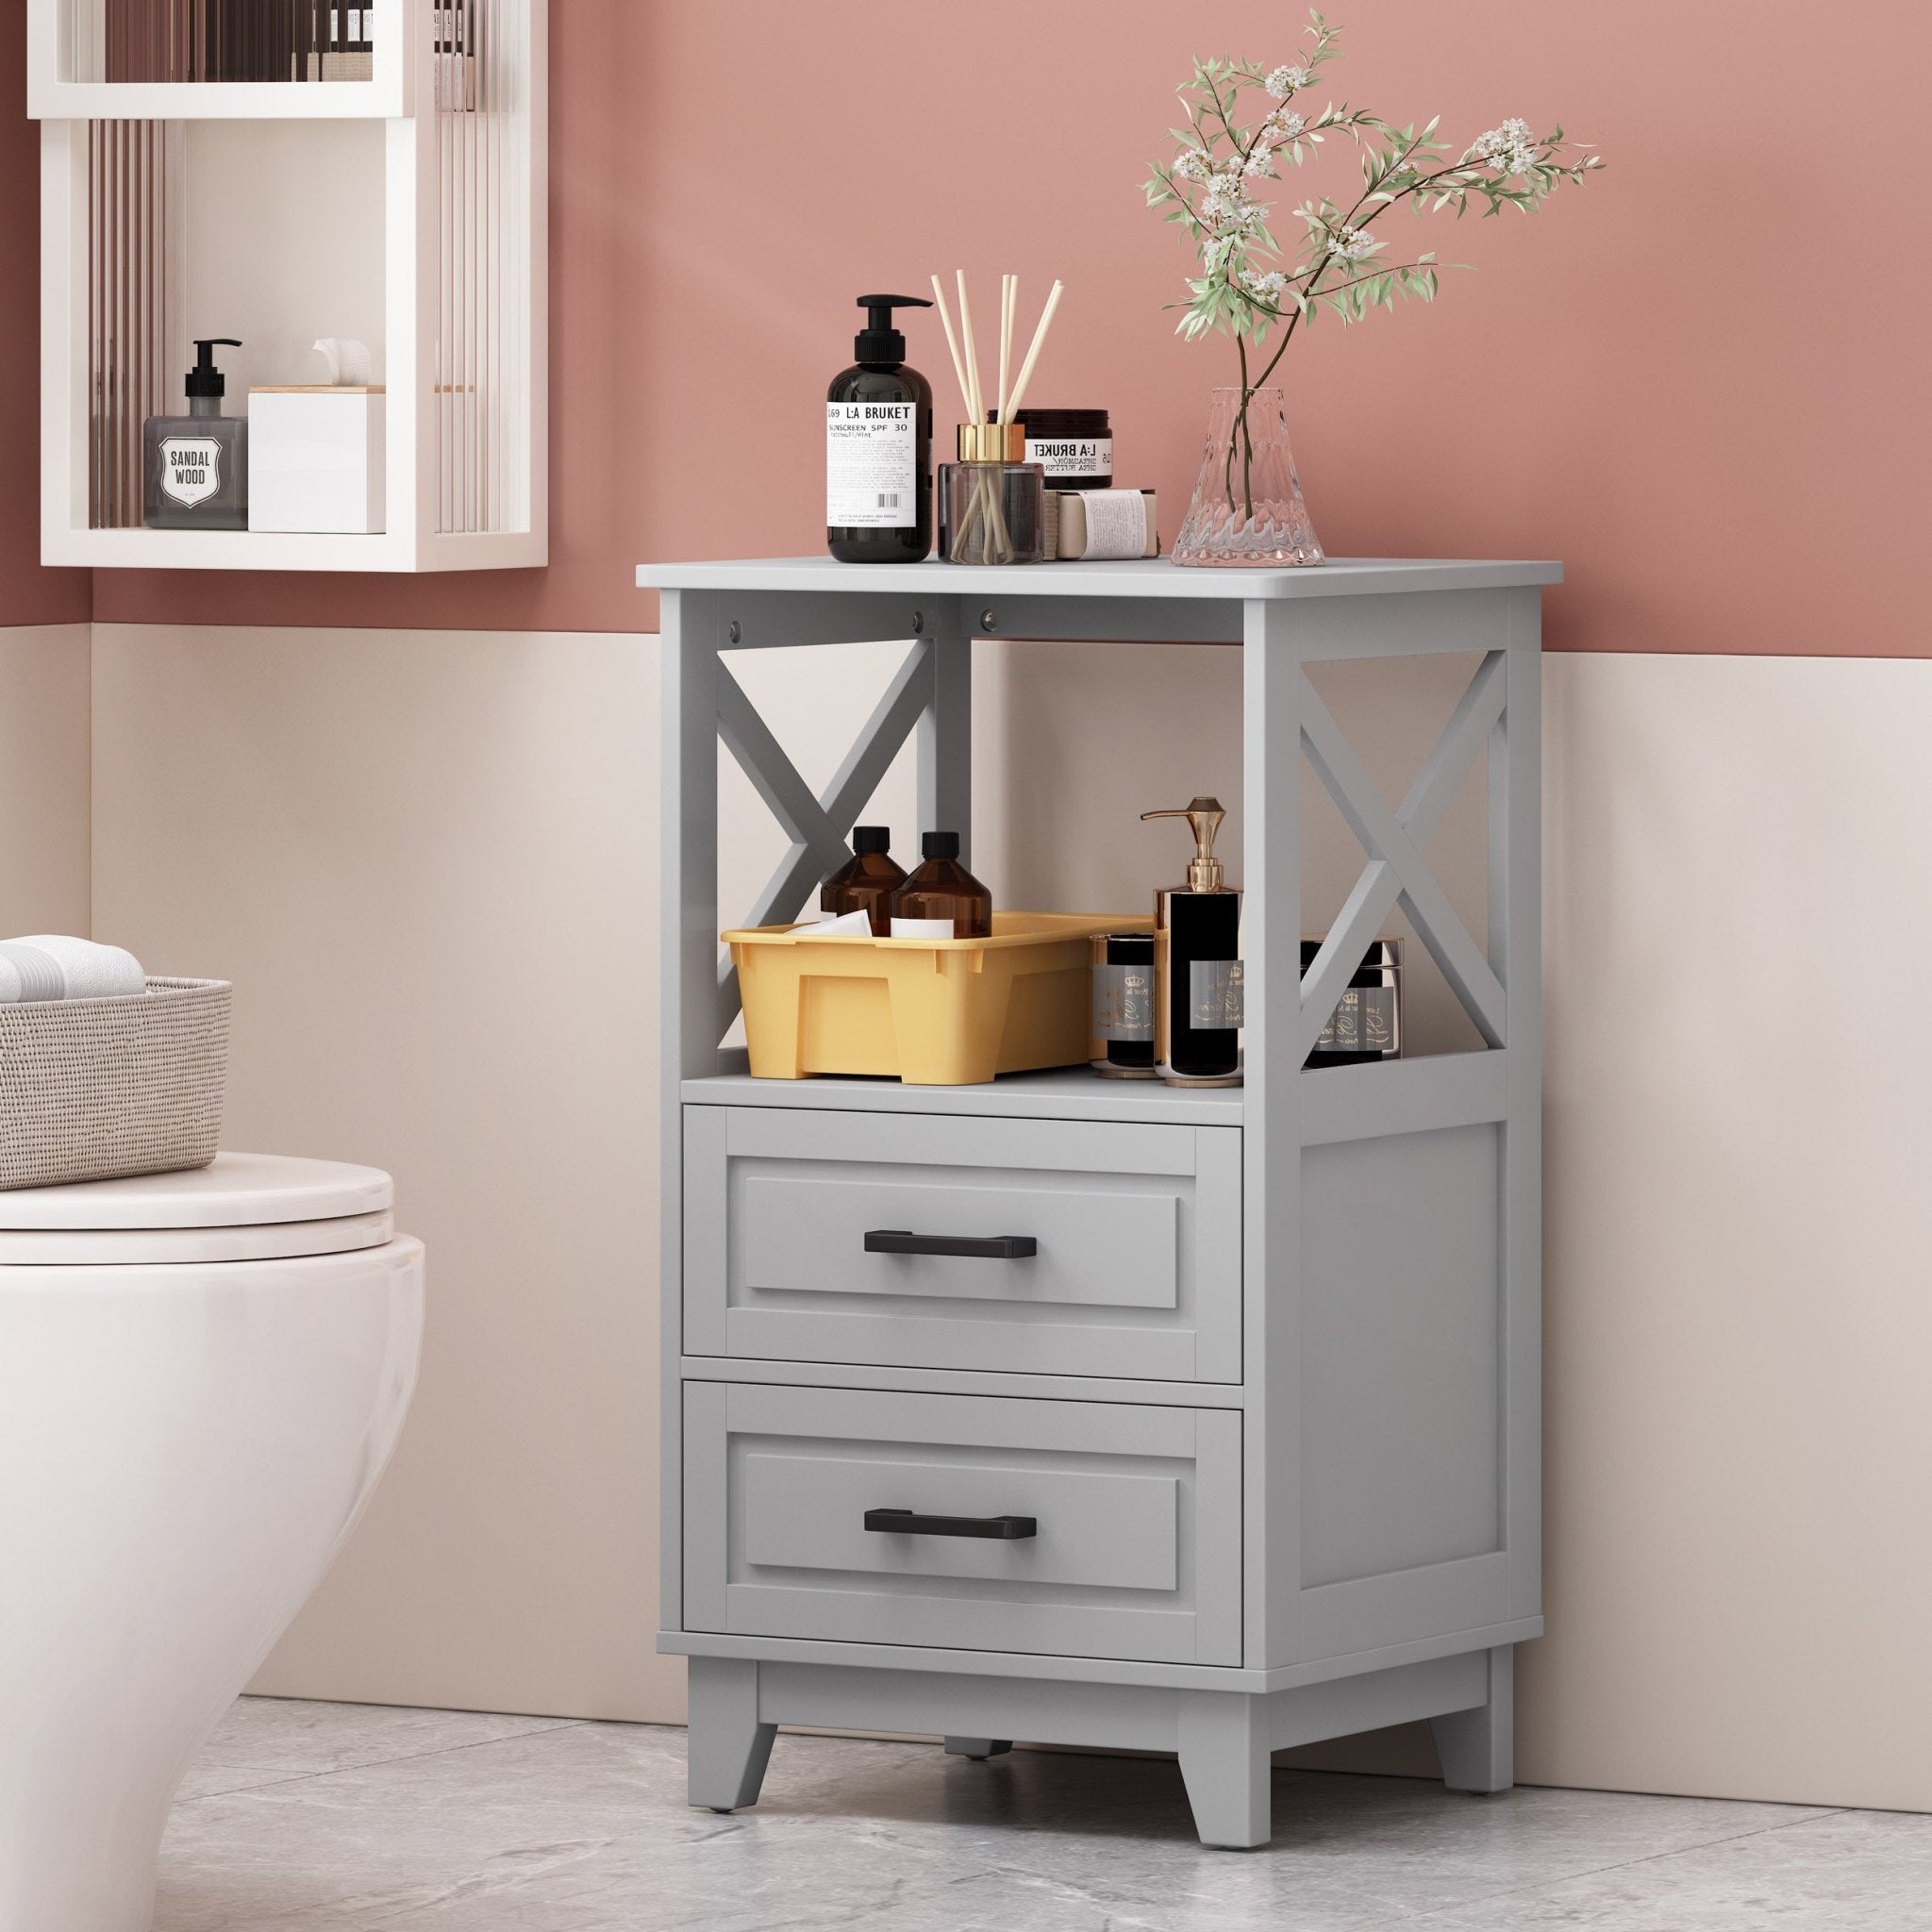 2 Drawer Bathroom Cabinet - Tuesday Morning-Furniture | Cabinets & Storage | Storage Cabinets & Lockers